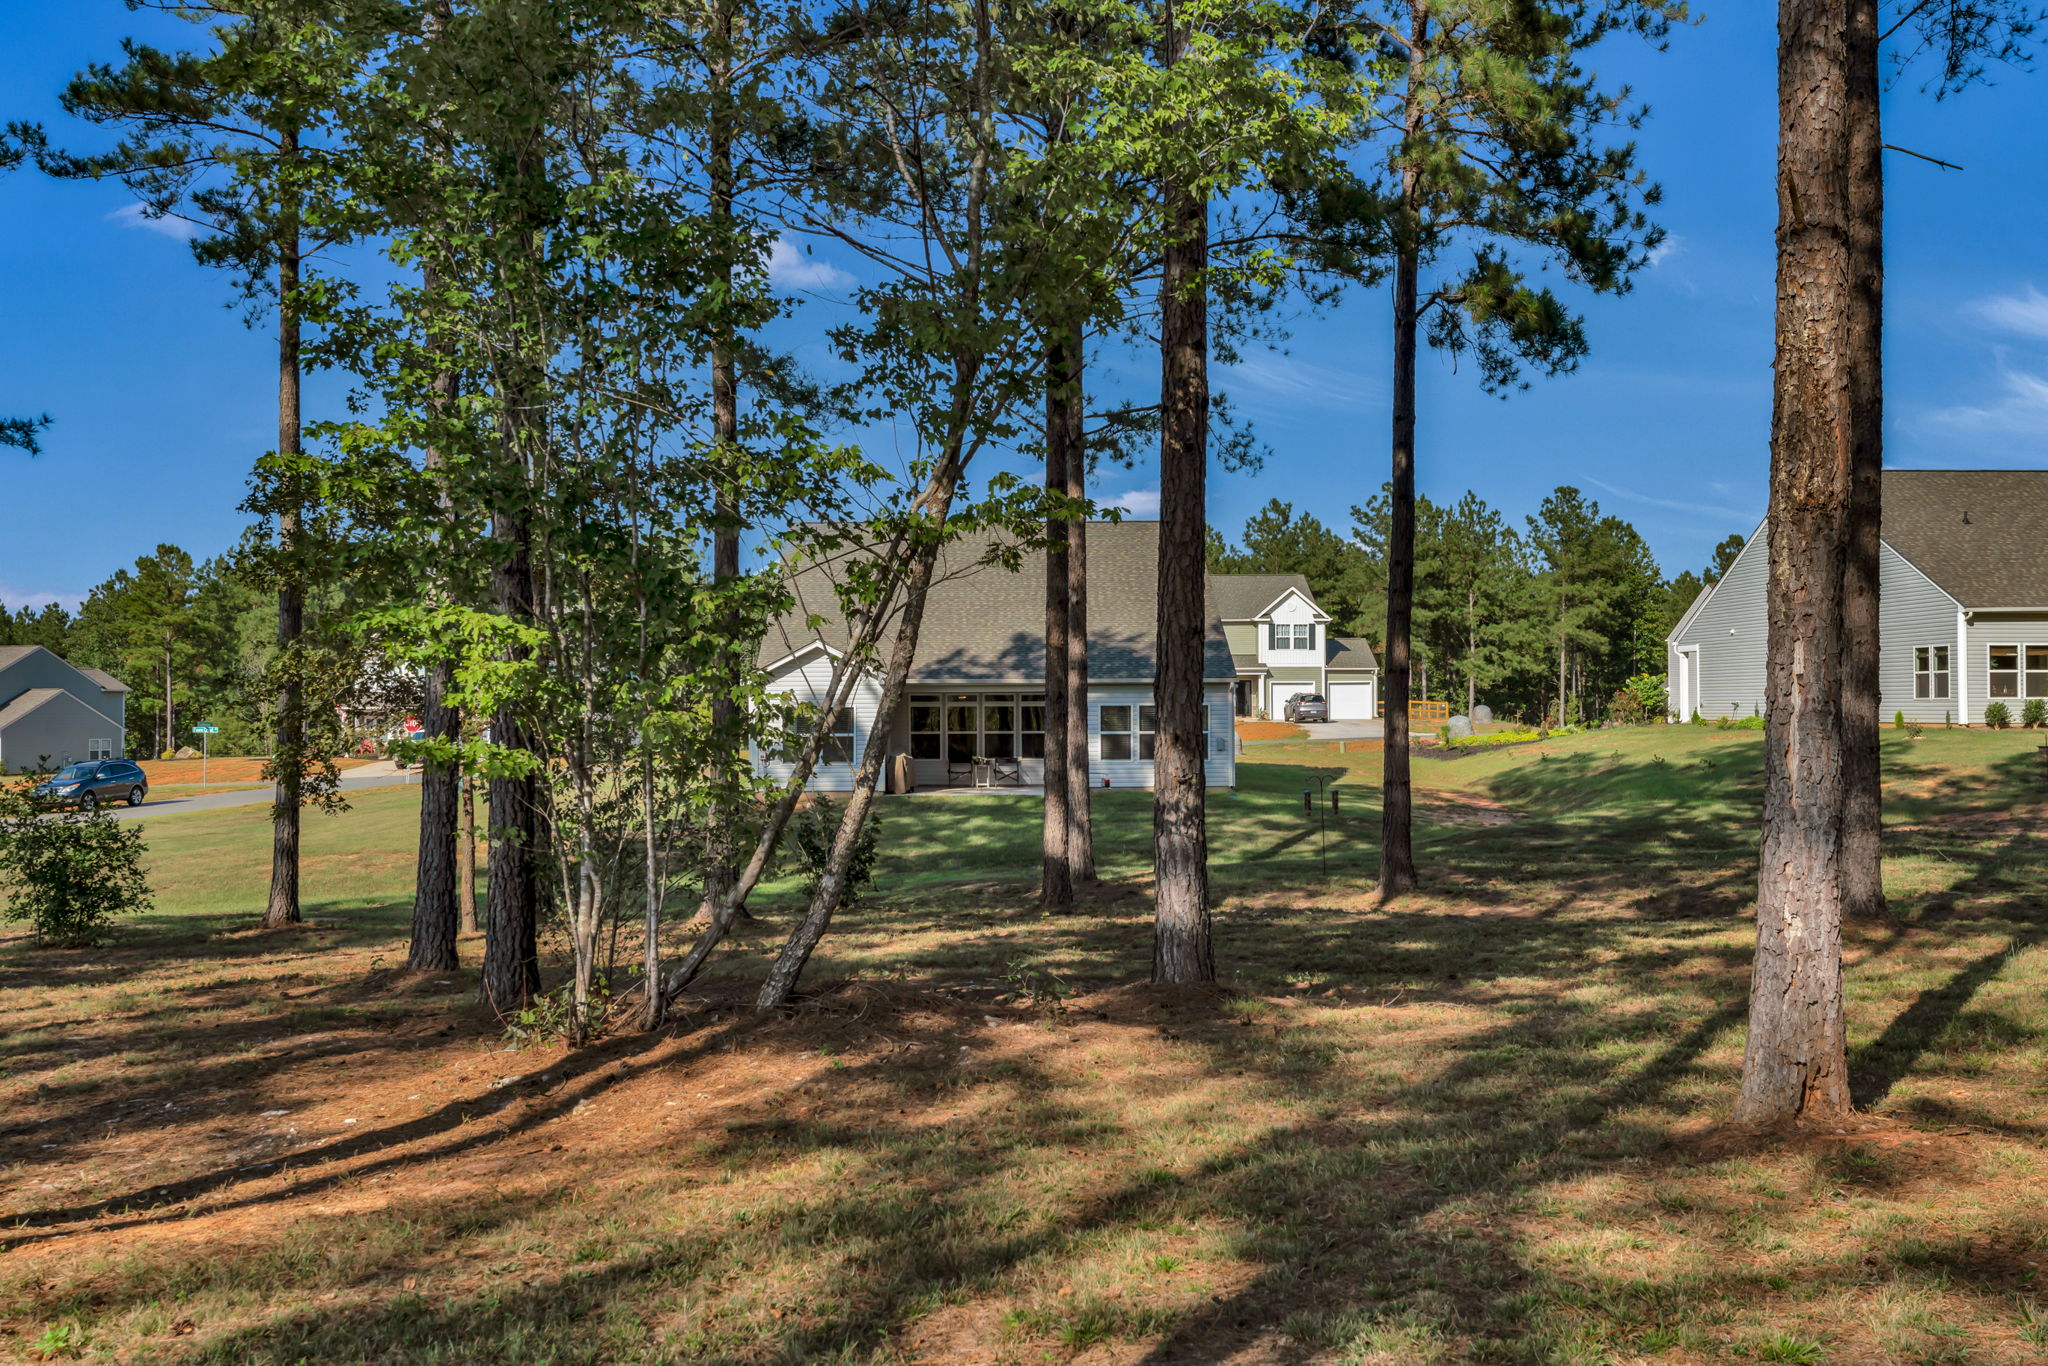  6313 Fawn Crest Dr., Waxhaw, NC 28173, US Photo 37